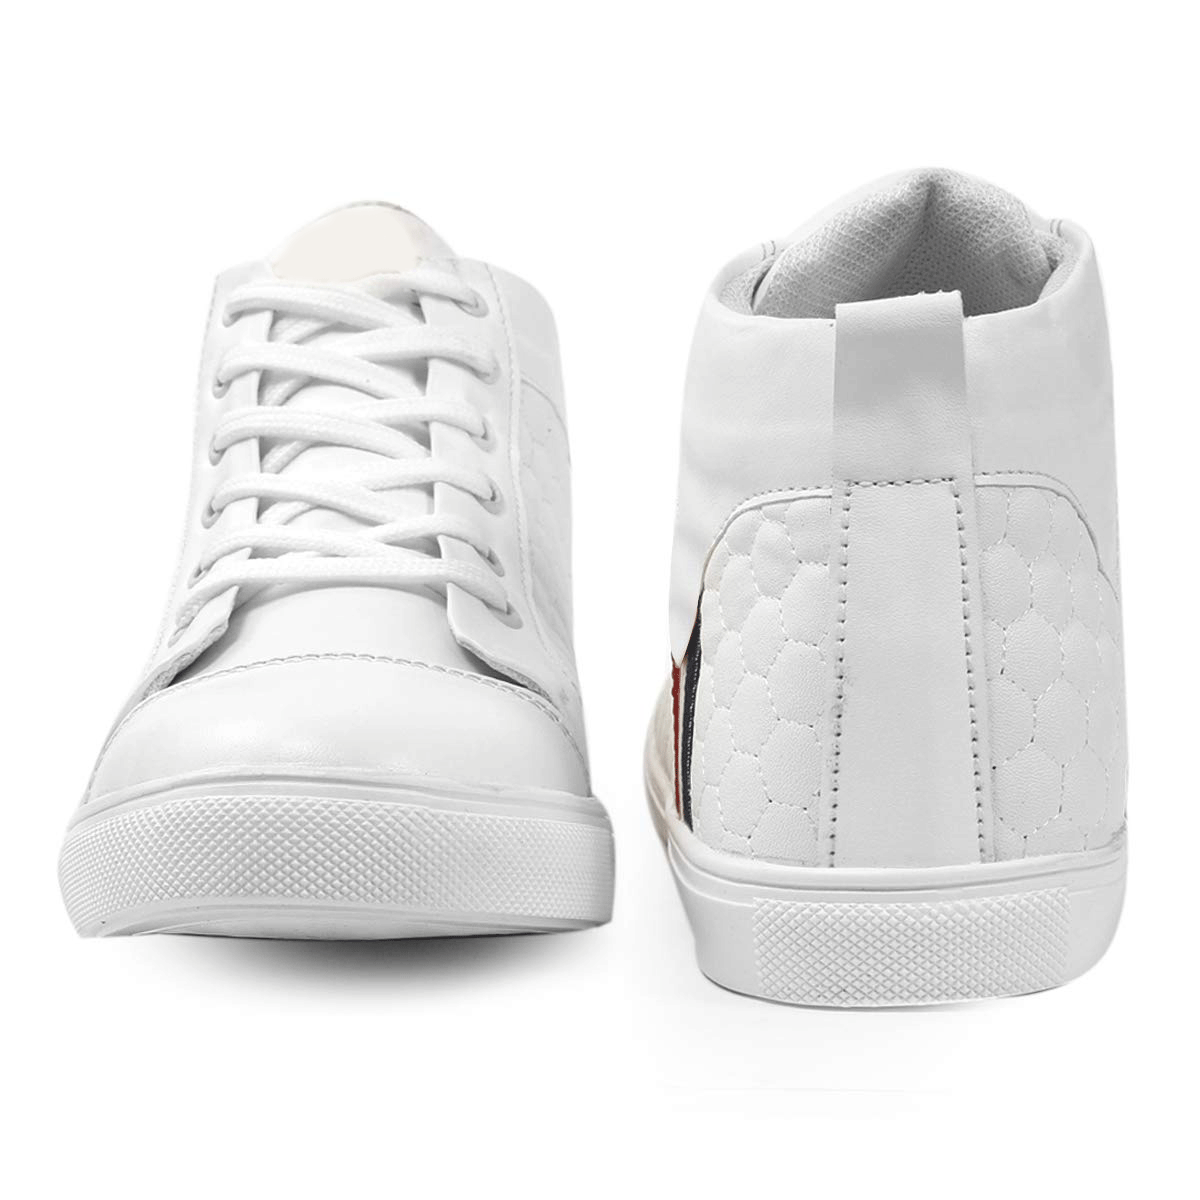 Latest Casual Sneakers in Lace-up With High Ankle Boot Form-JonasParamount